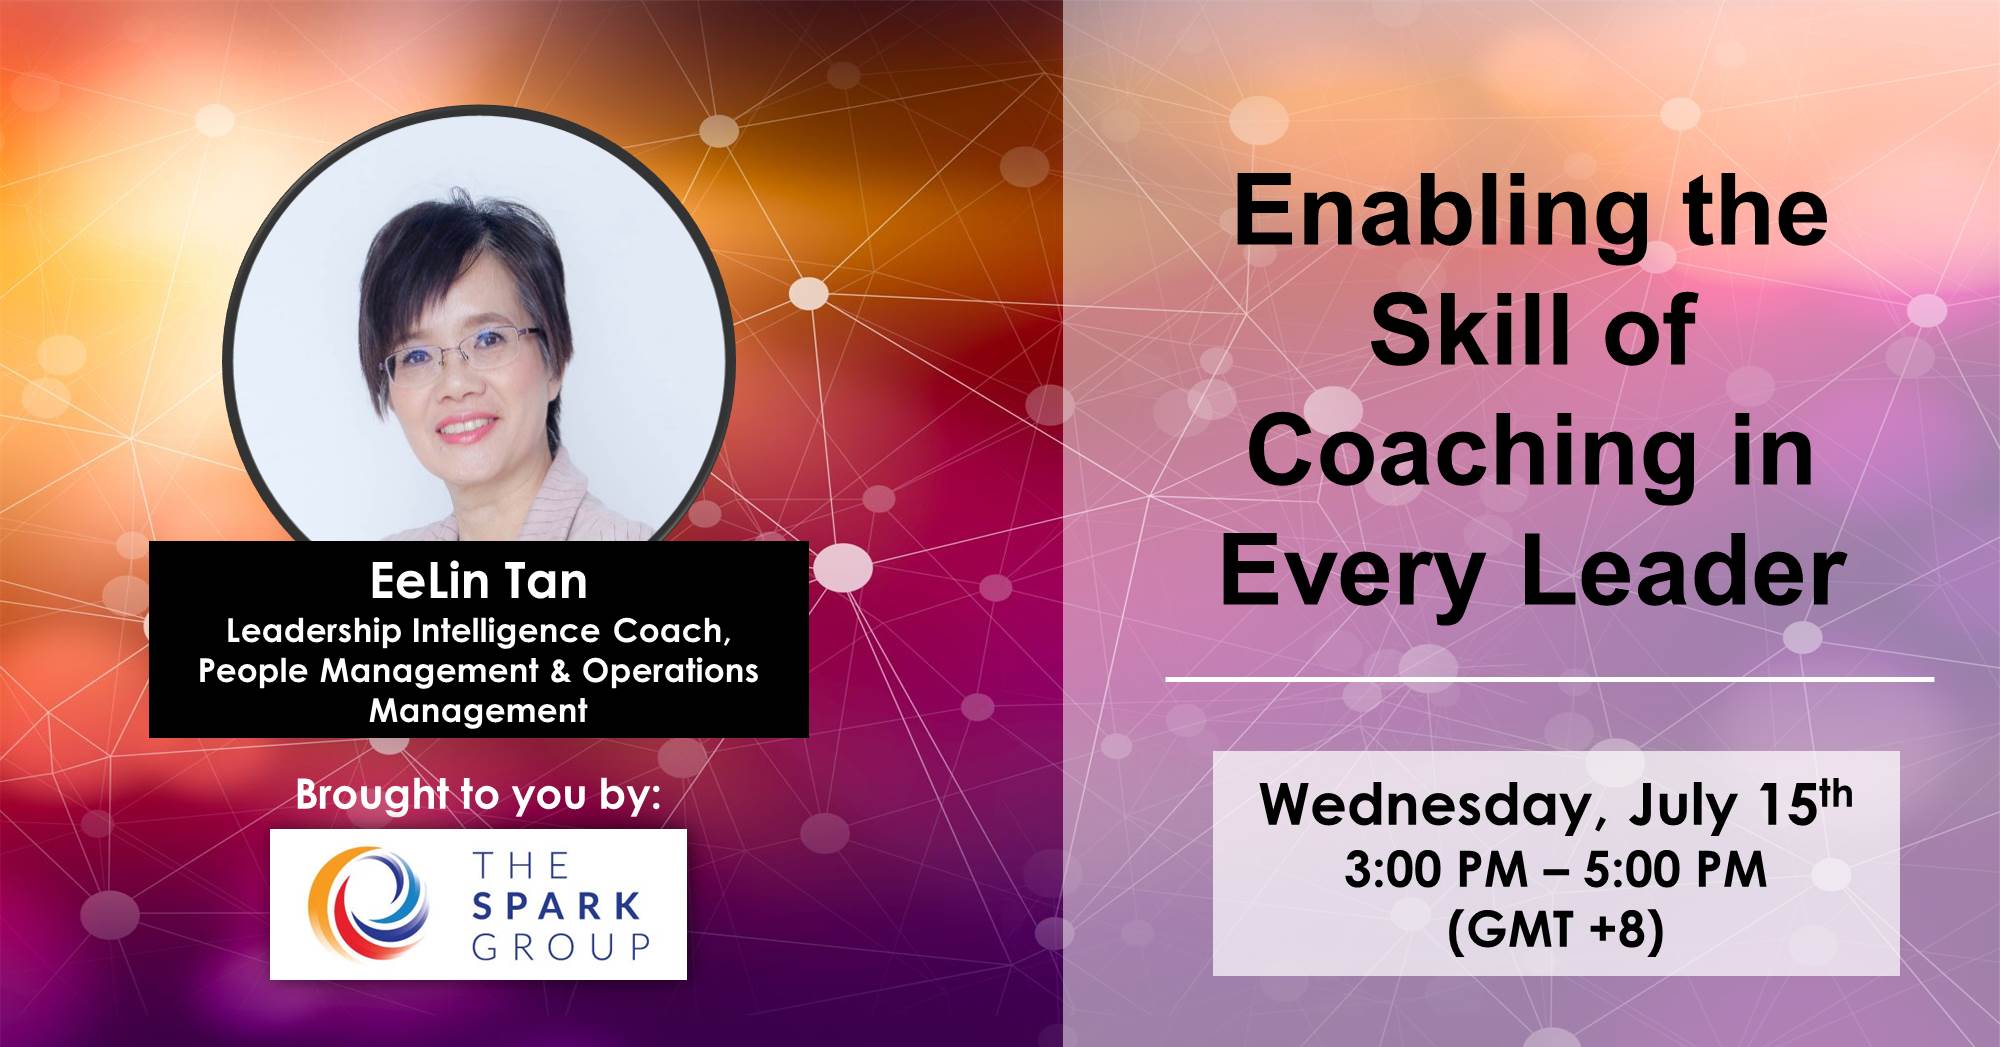 Coaching Skills for Leaders - The Spark Group